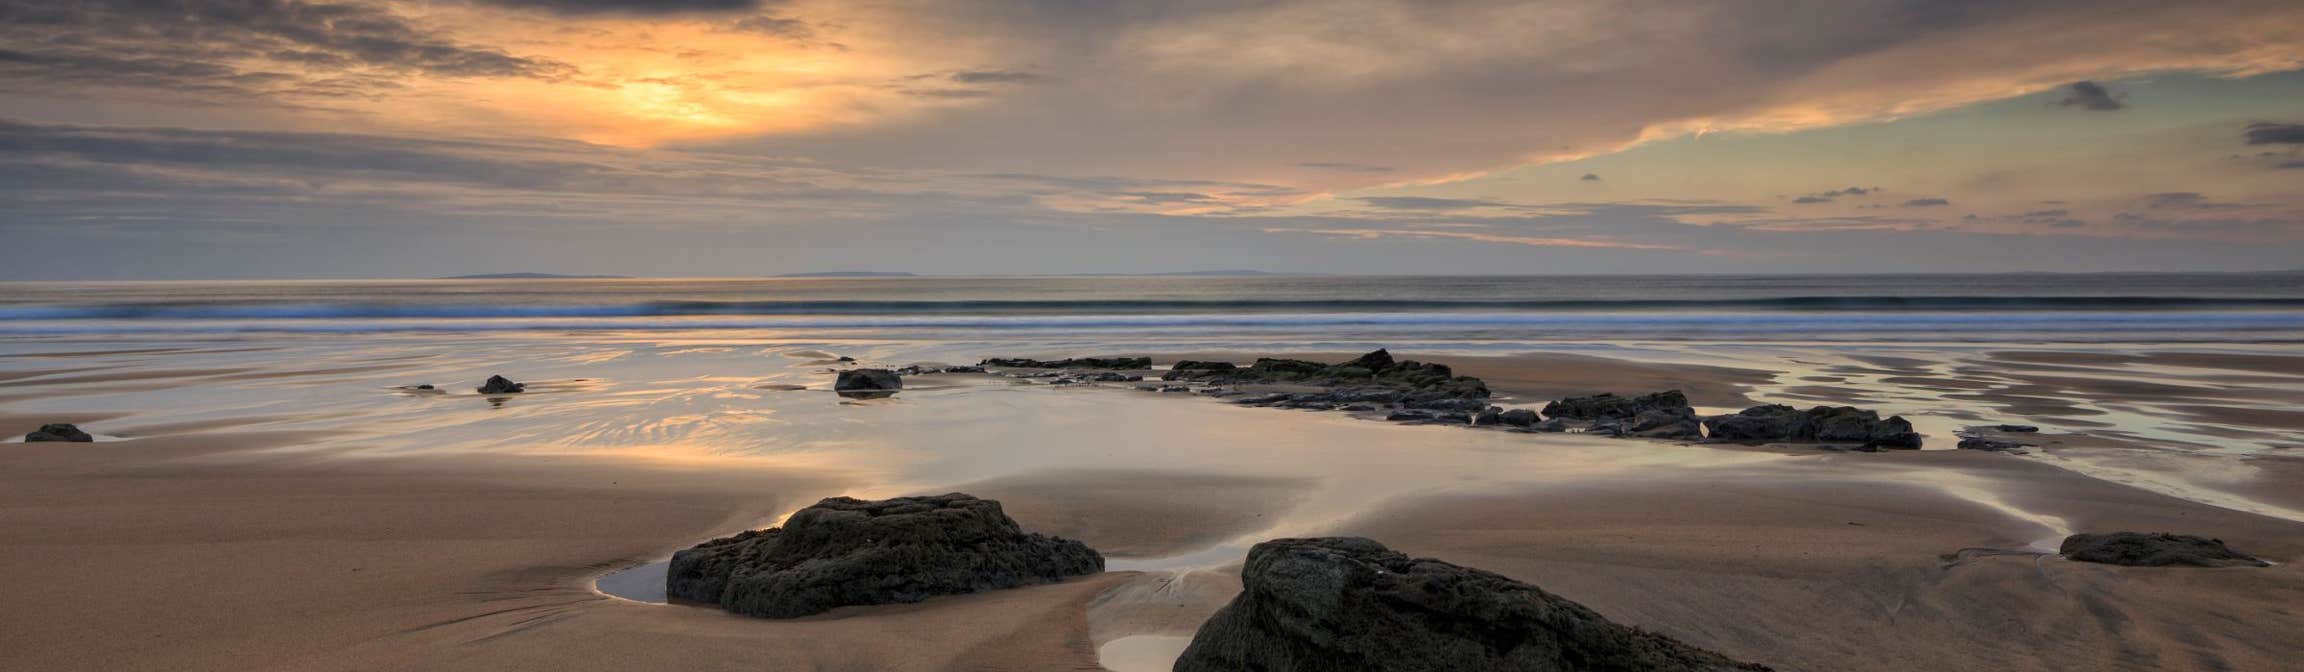 Image of Fanore beach in County Clare